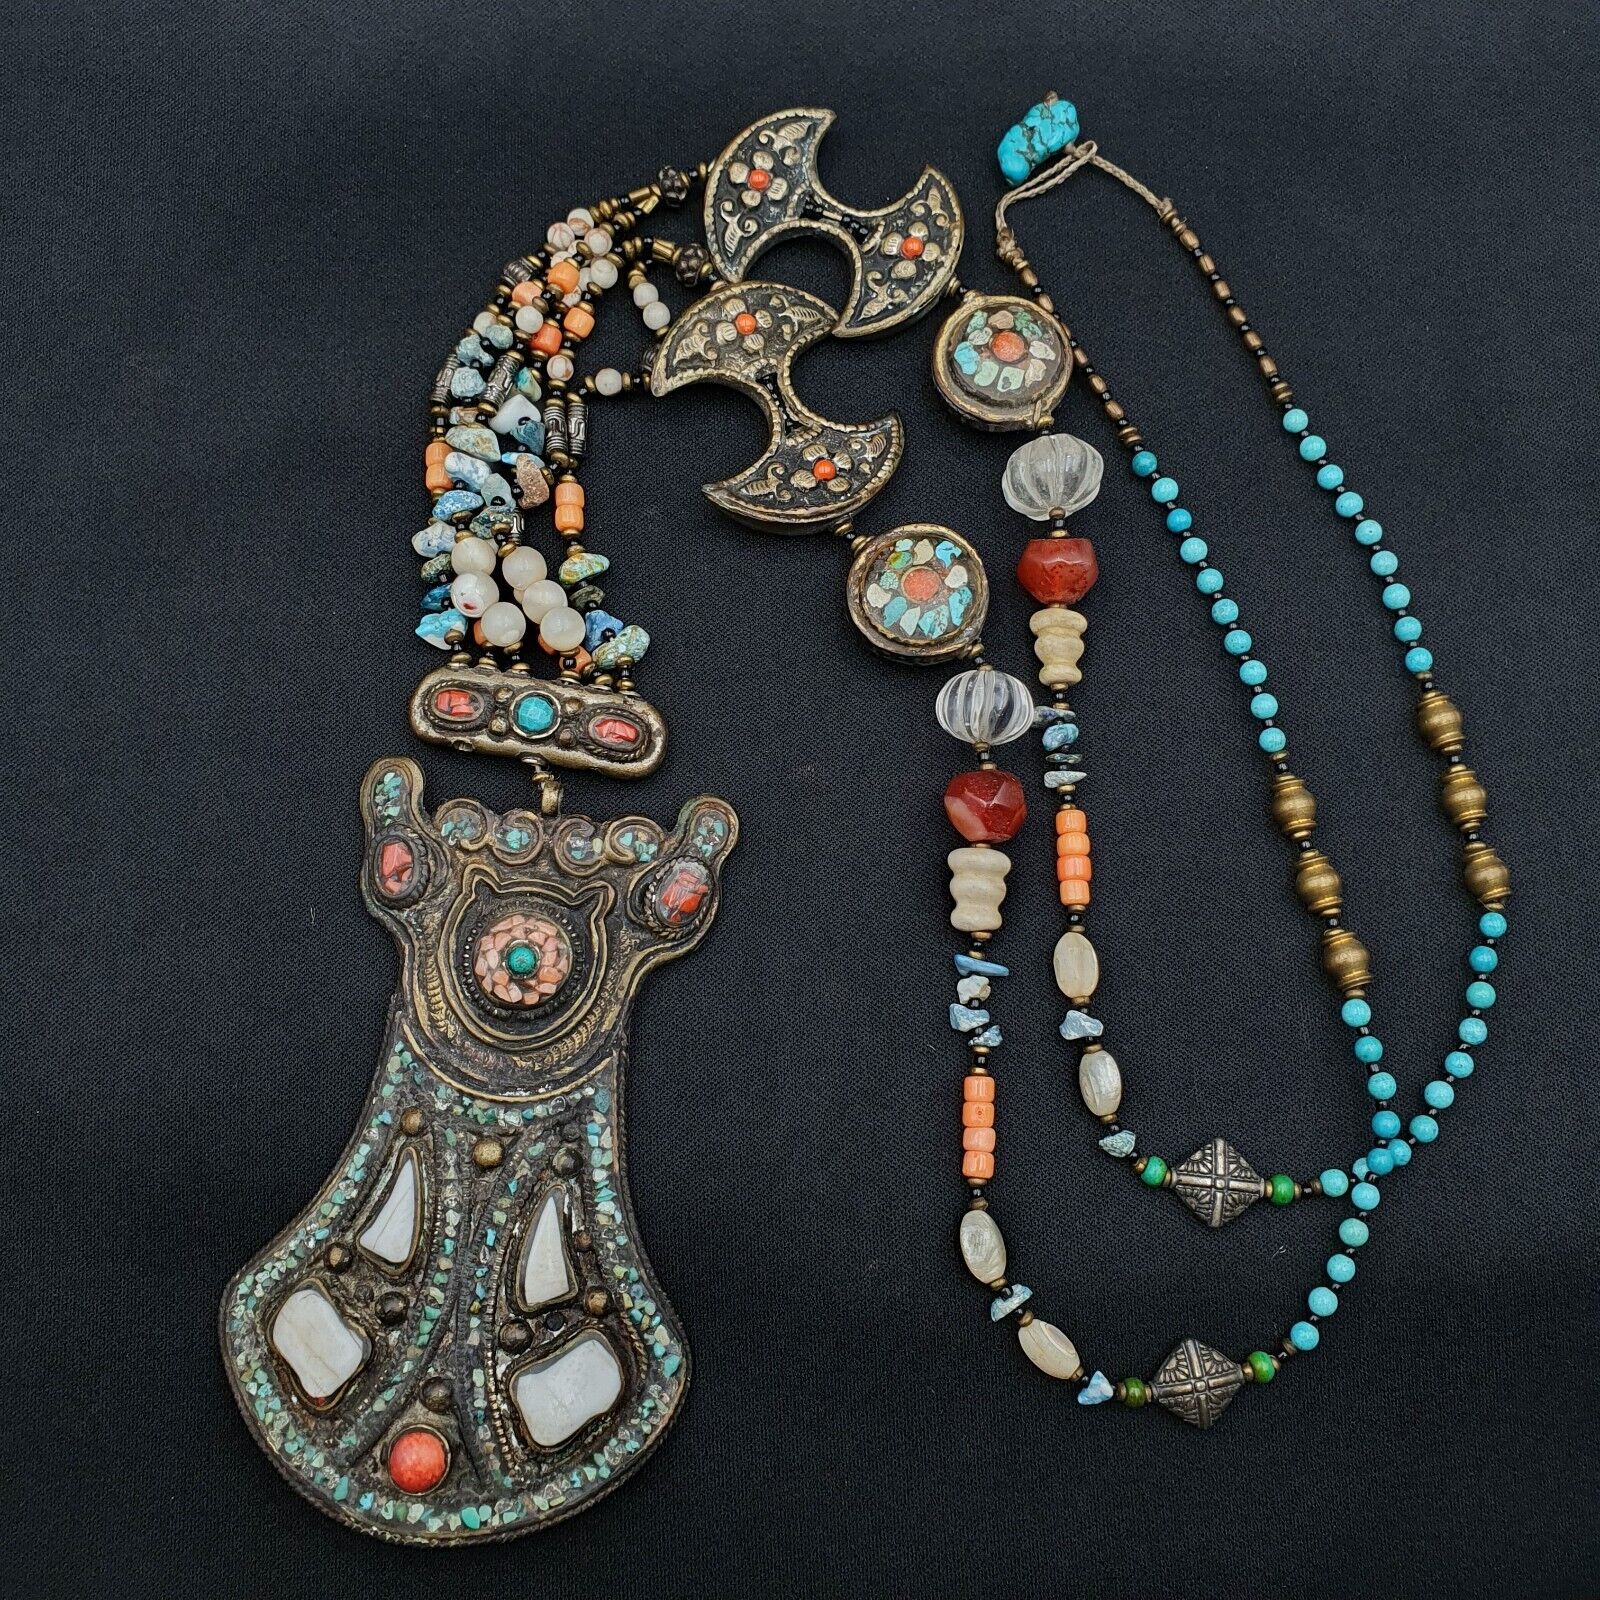 Tibetan Nepalese Necklace Handcrafted Turquoise coral Vintage Jewelry Necklace